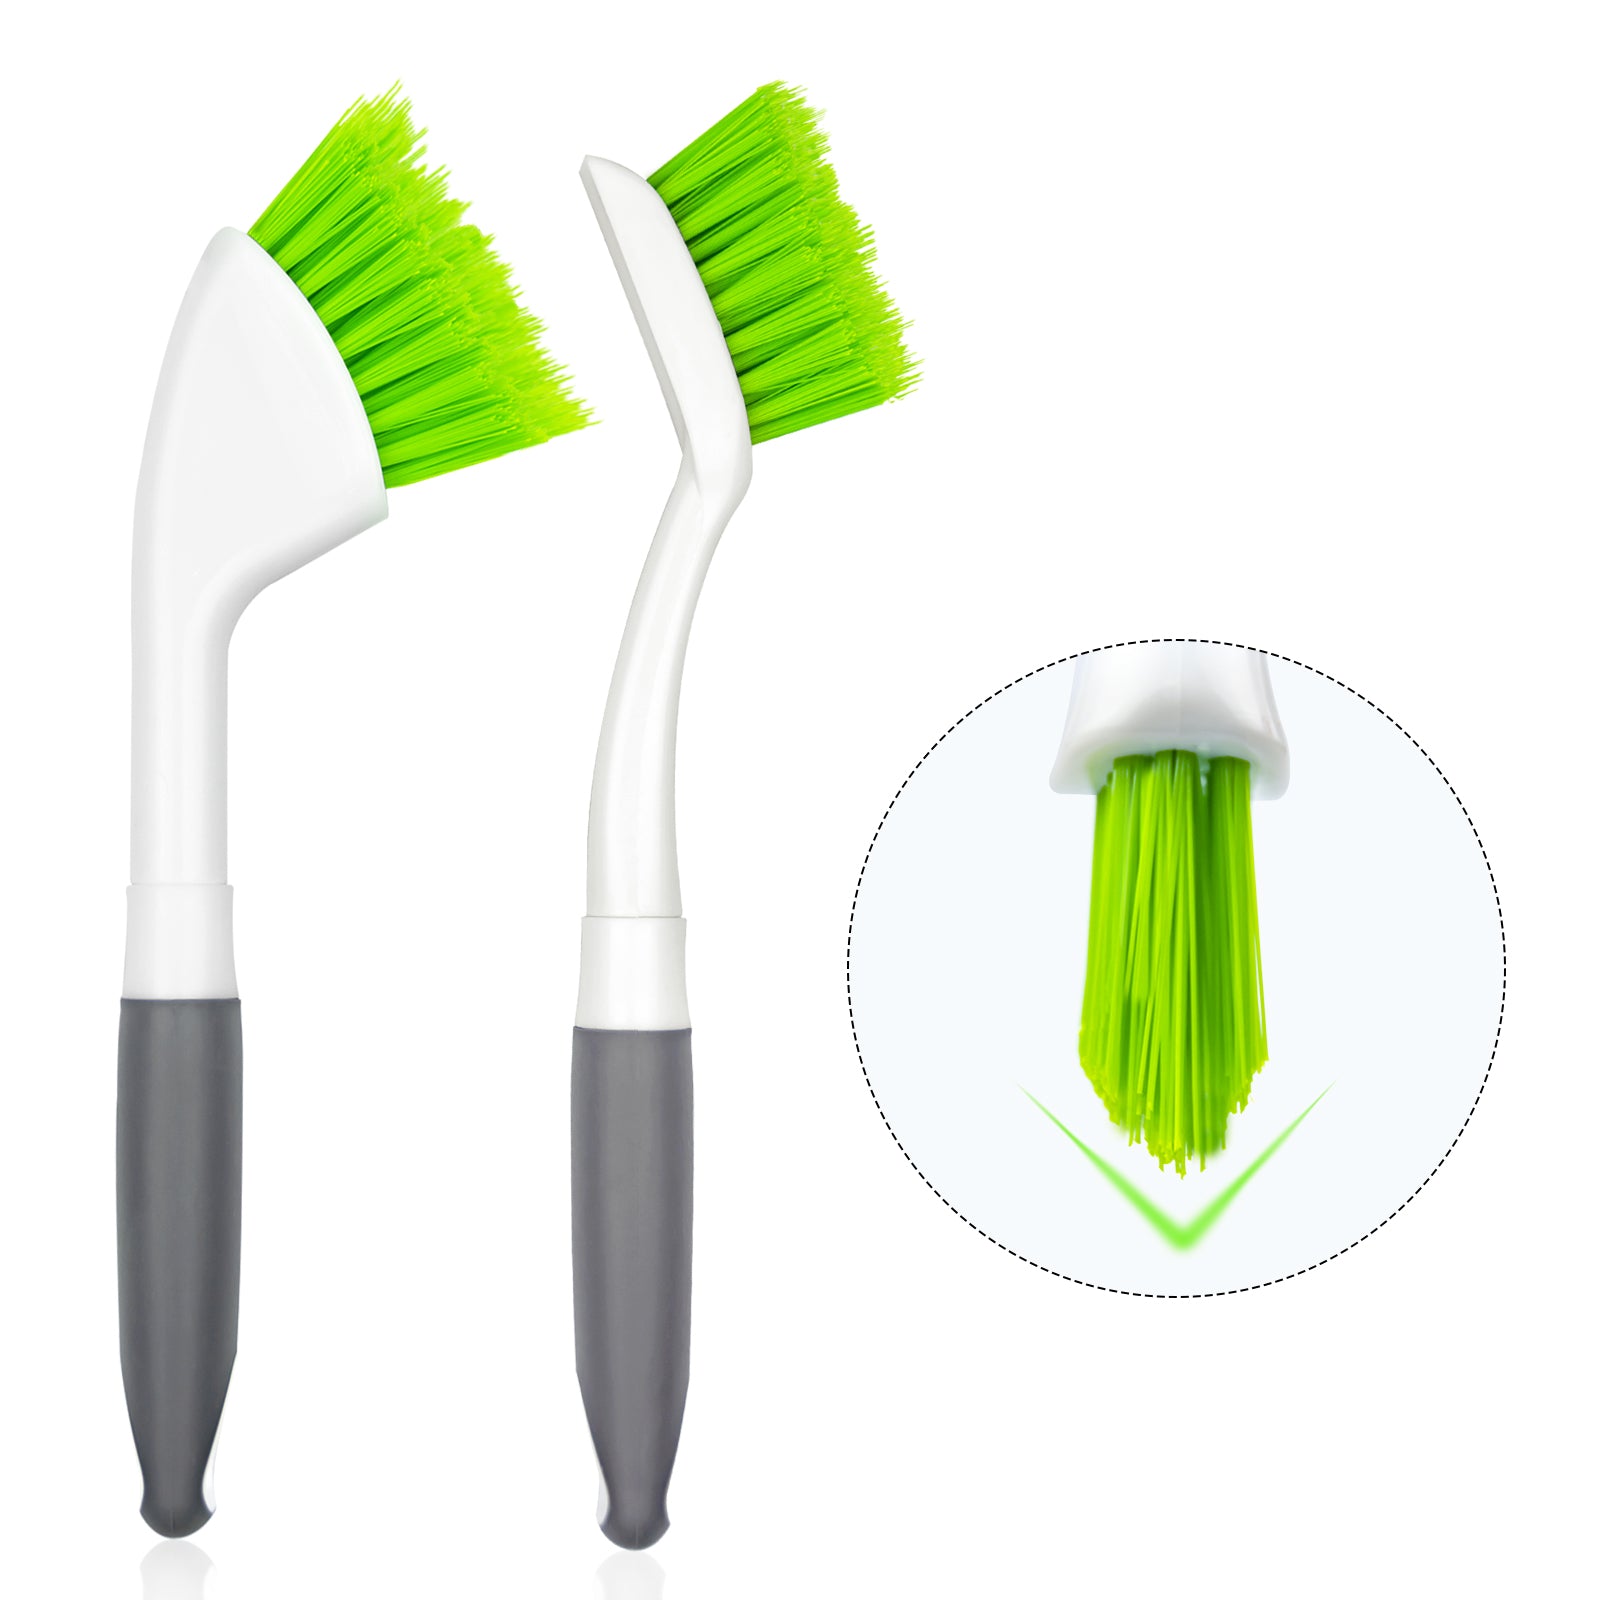 Crevice Brush Kitchen Cleaning Tool Set, Hard Bristle Groove